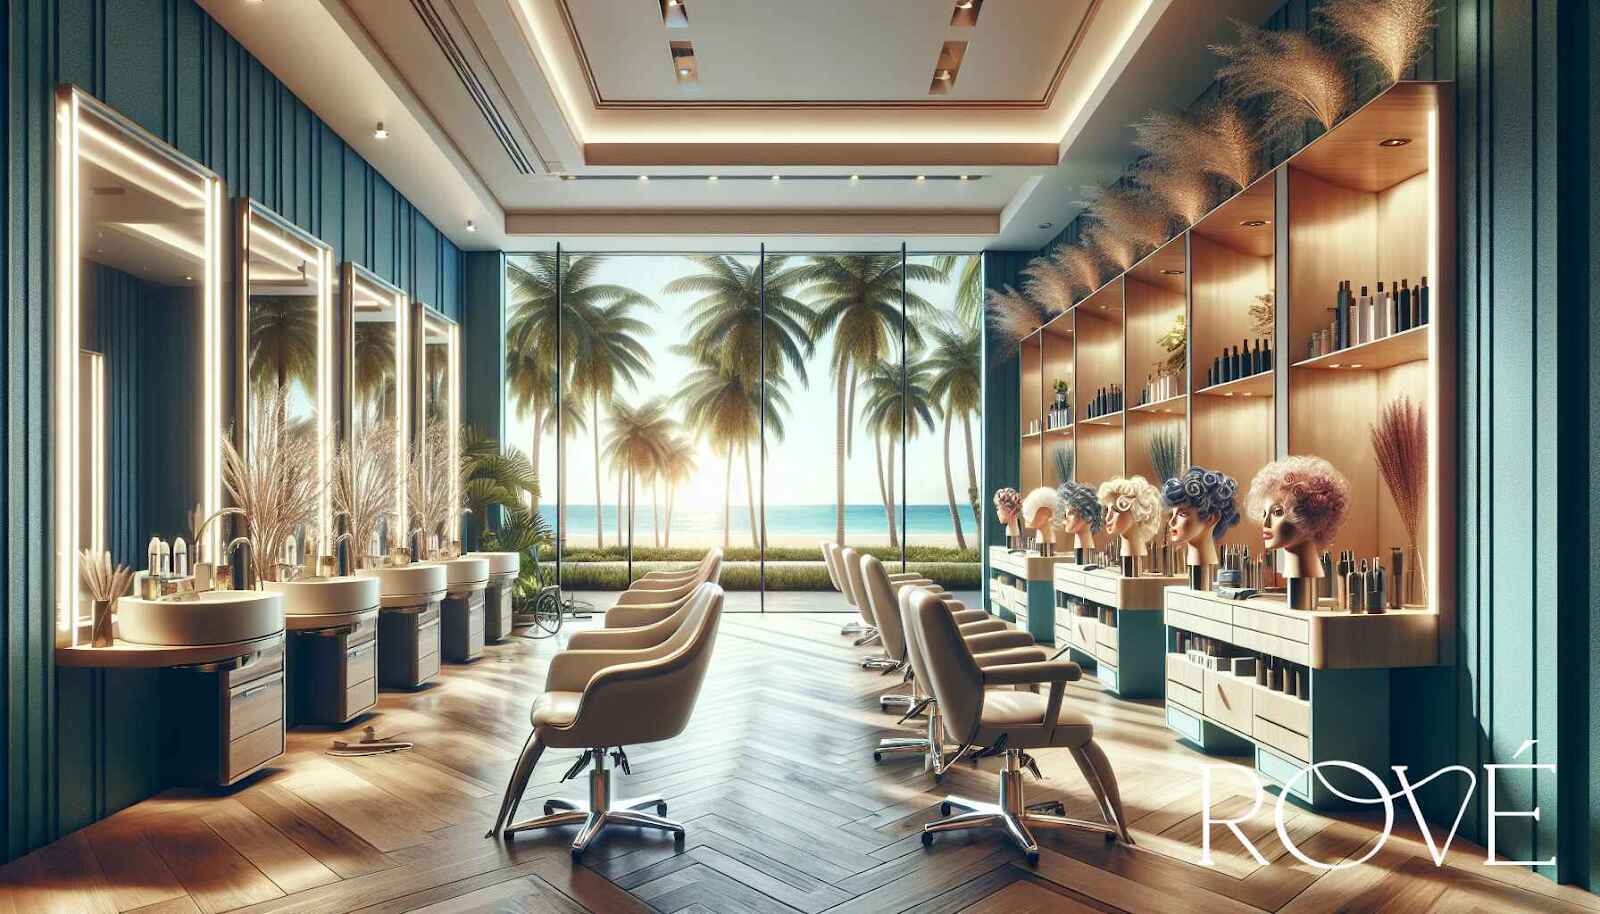 How to Find Elite Hair Stylists in South Florida